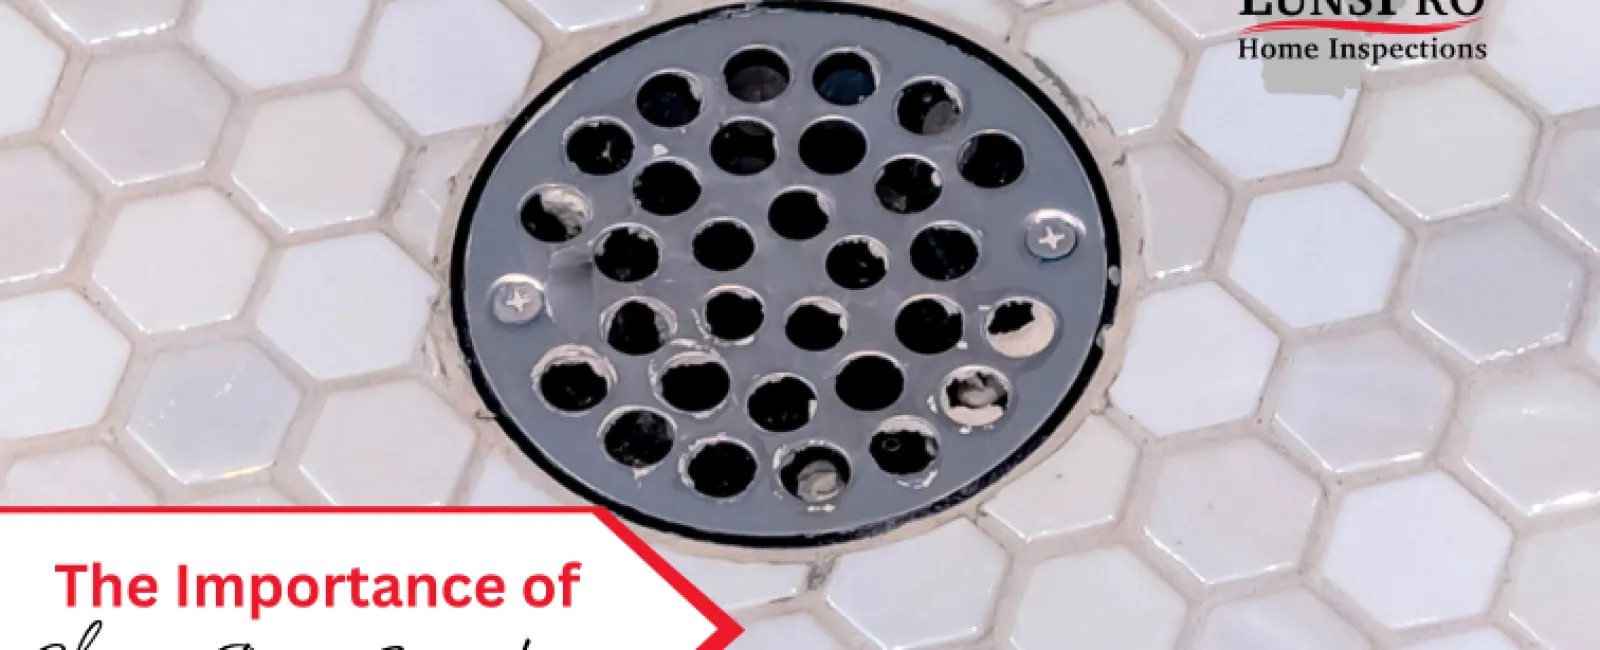 The Importance of Shower Drain Inspections